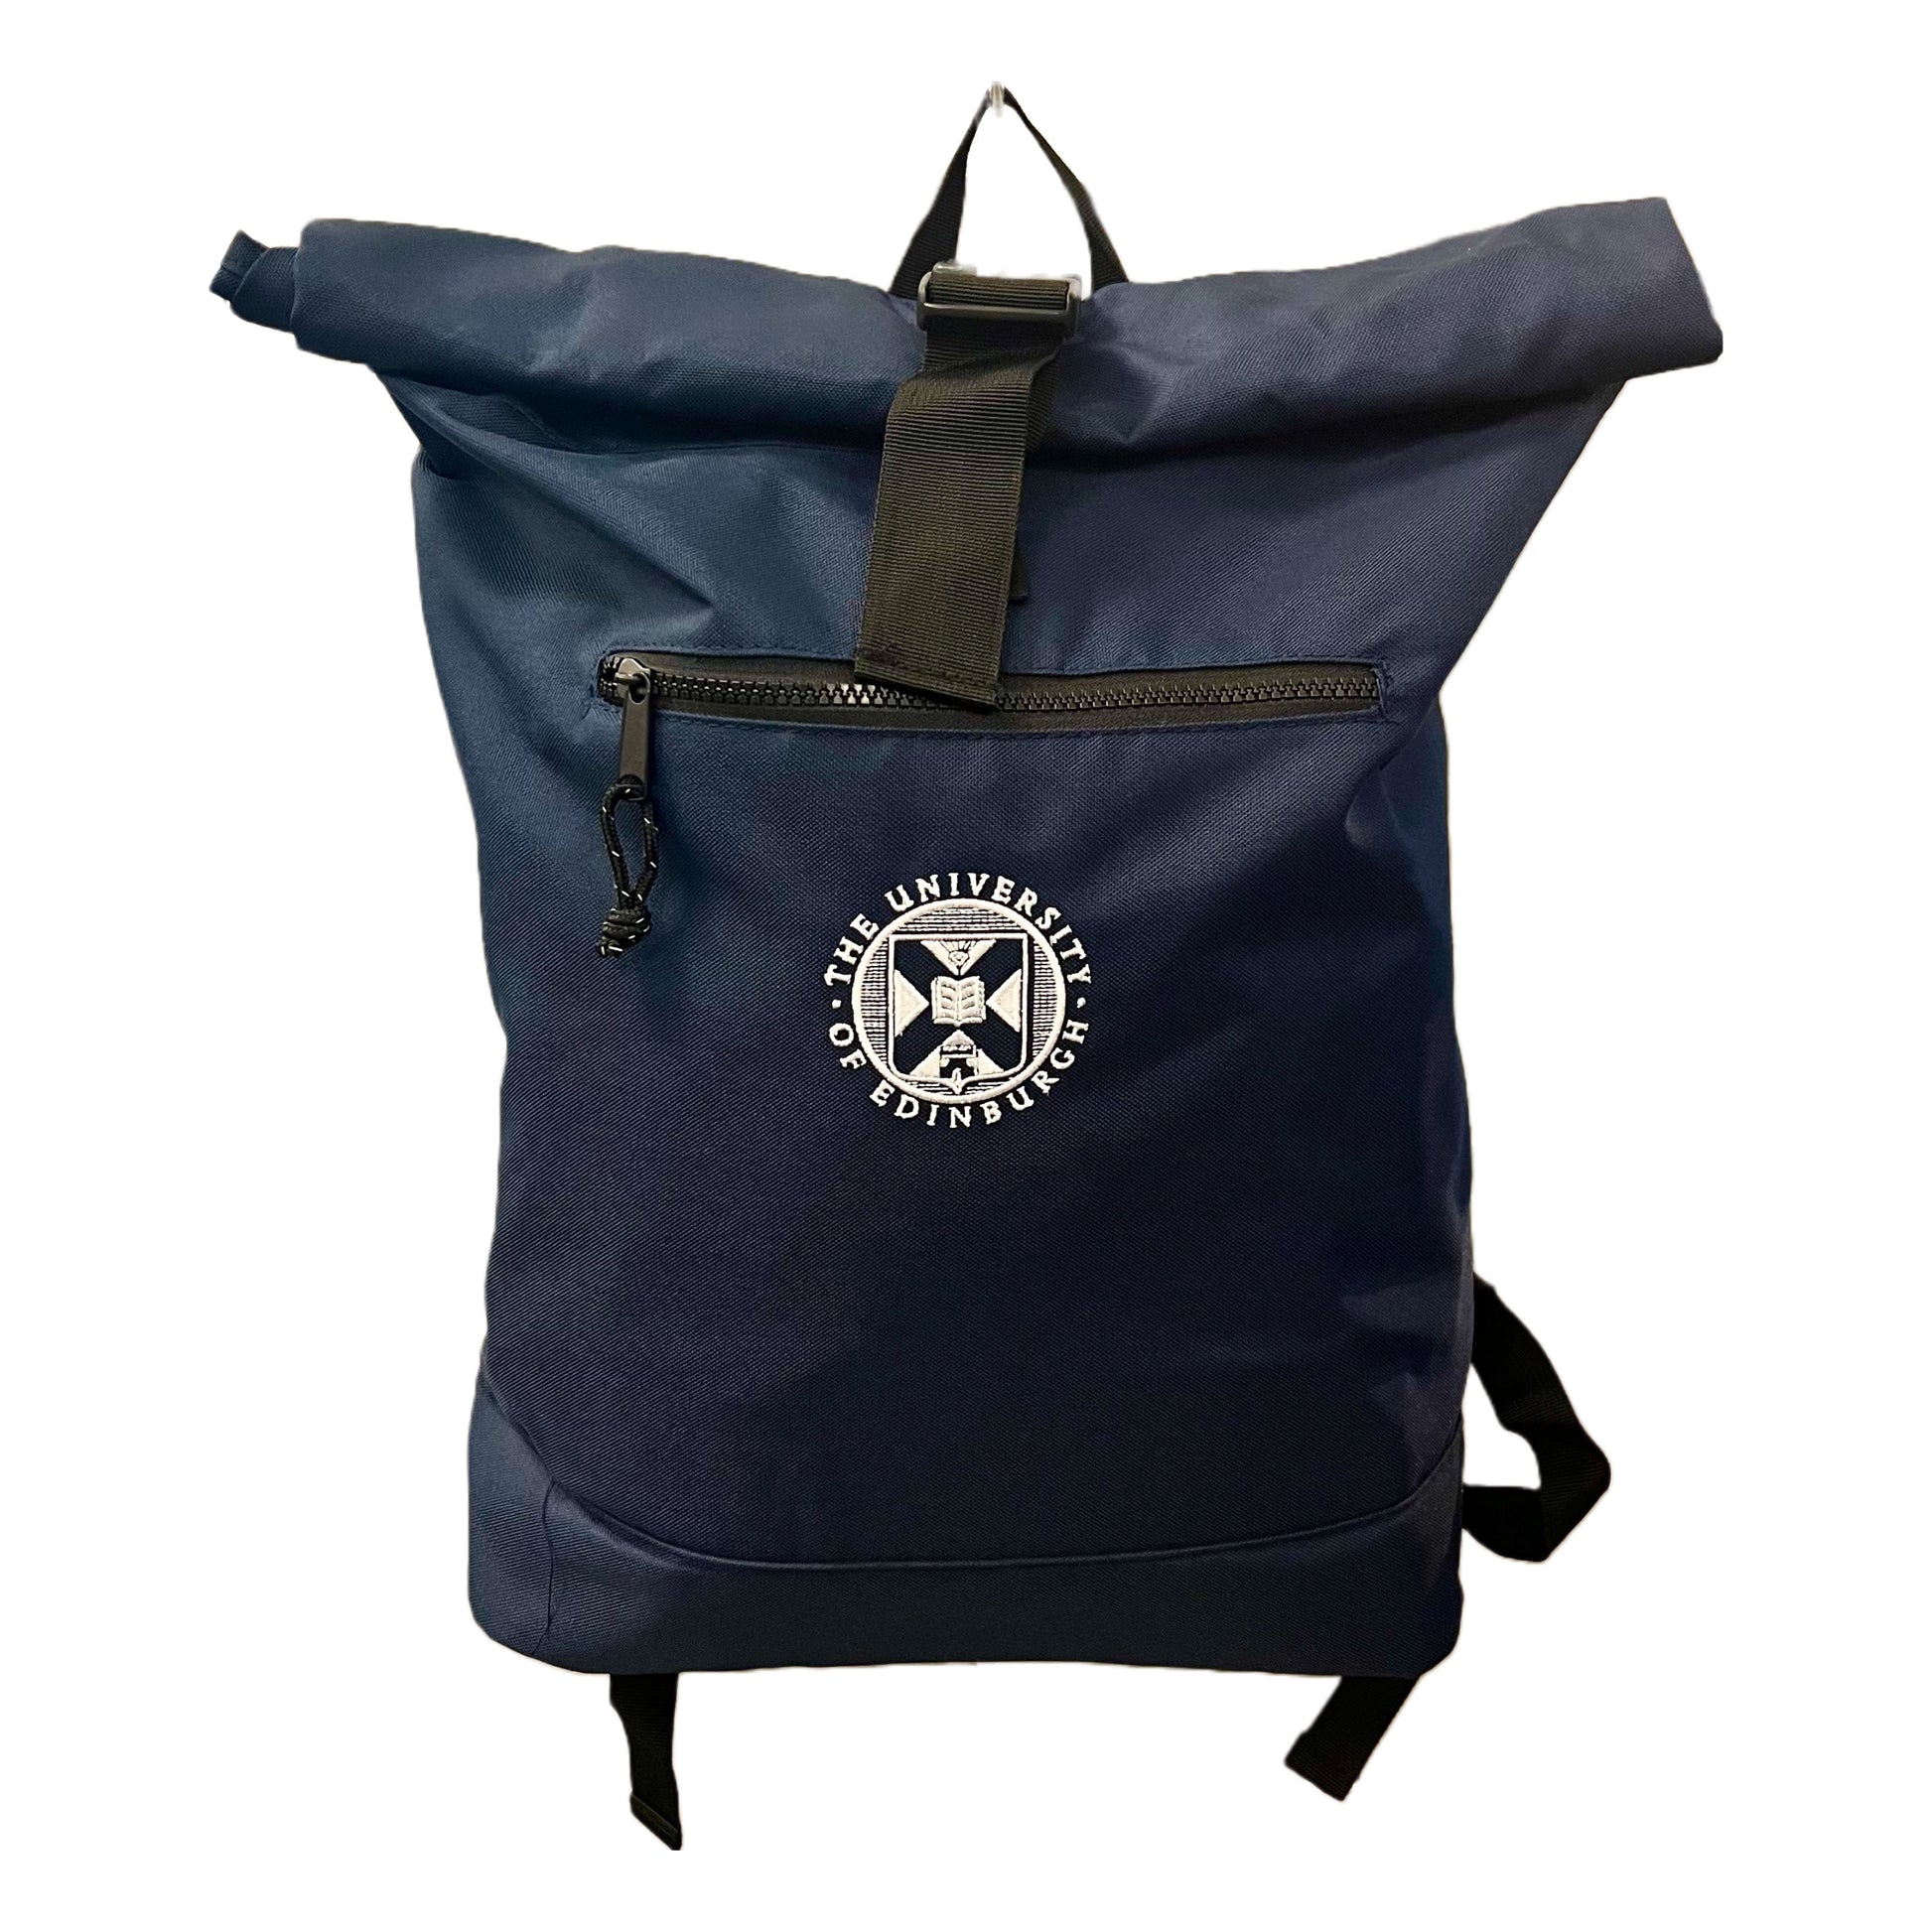 Navy roll-top backpack with University of Edinburgh crest stitched on the centre in white.